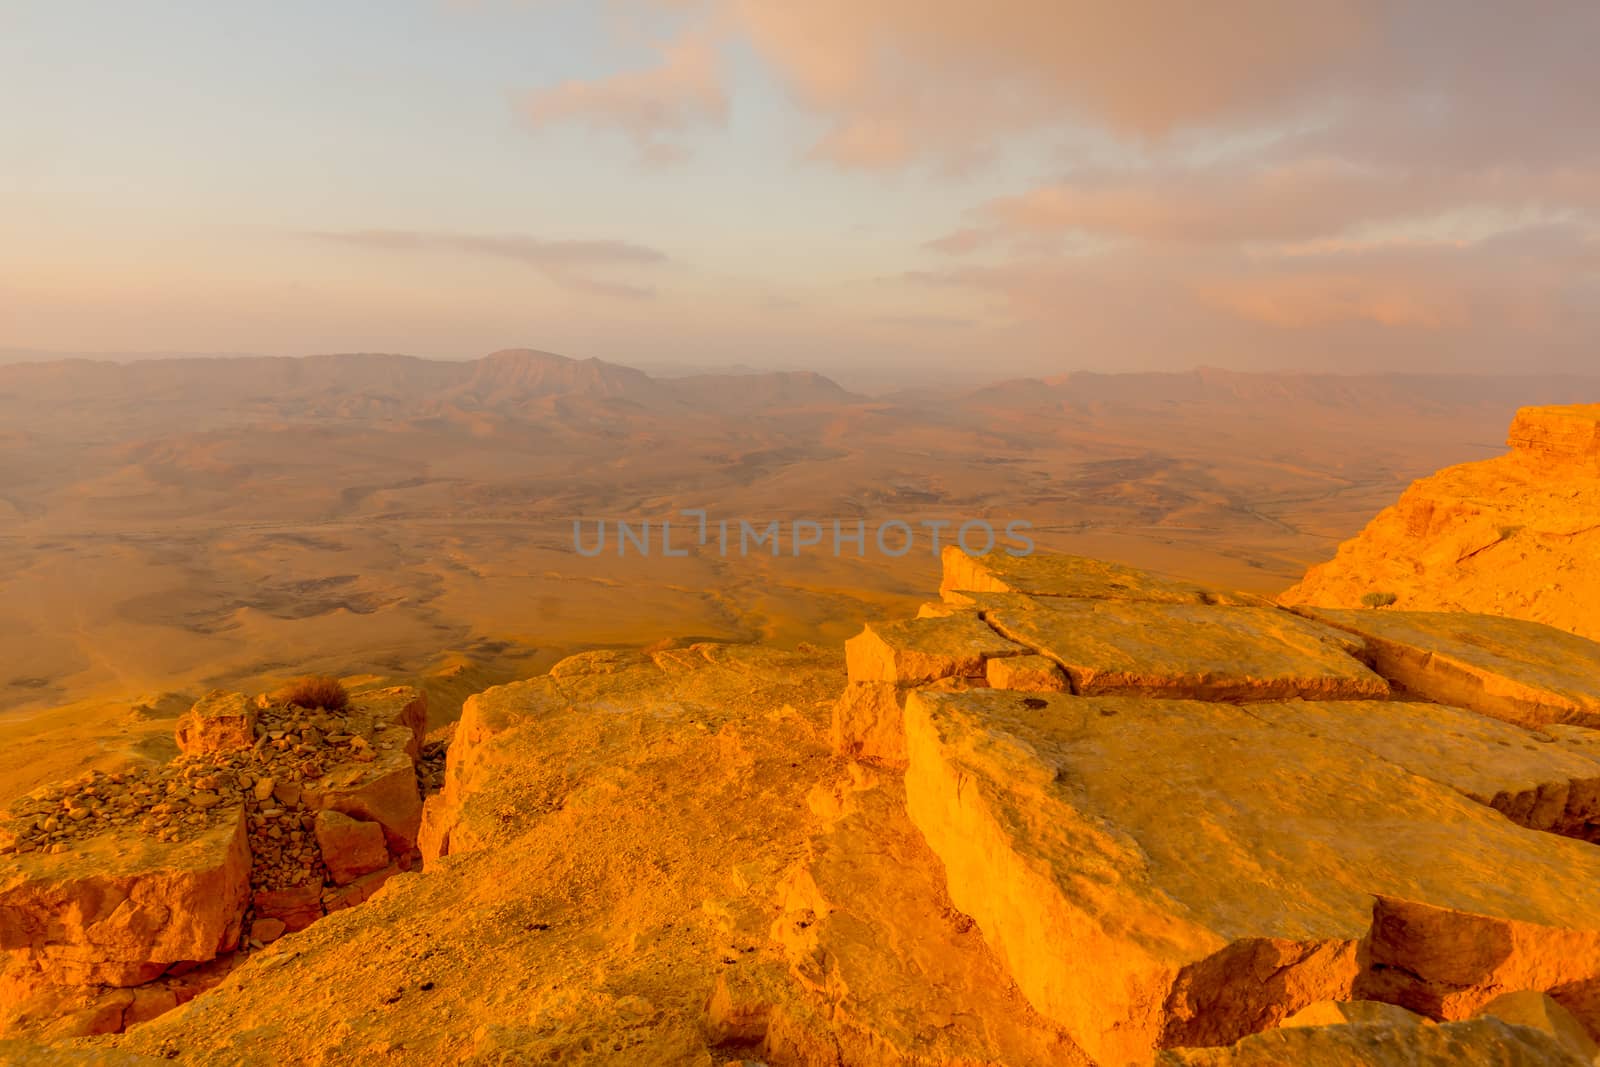 Sunrise view of cliffs and landscape in Makhtesh (crater) Ramon by RnDmS